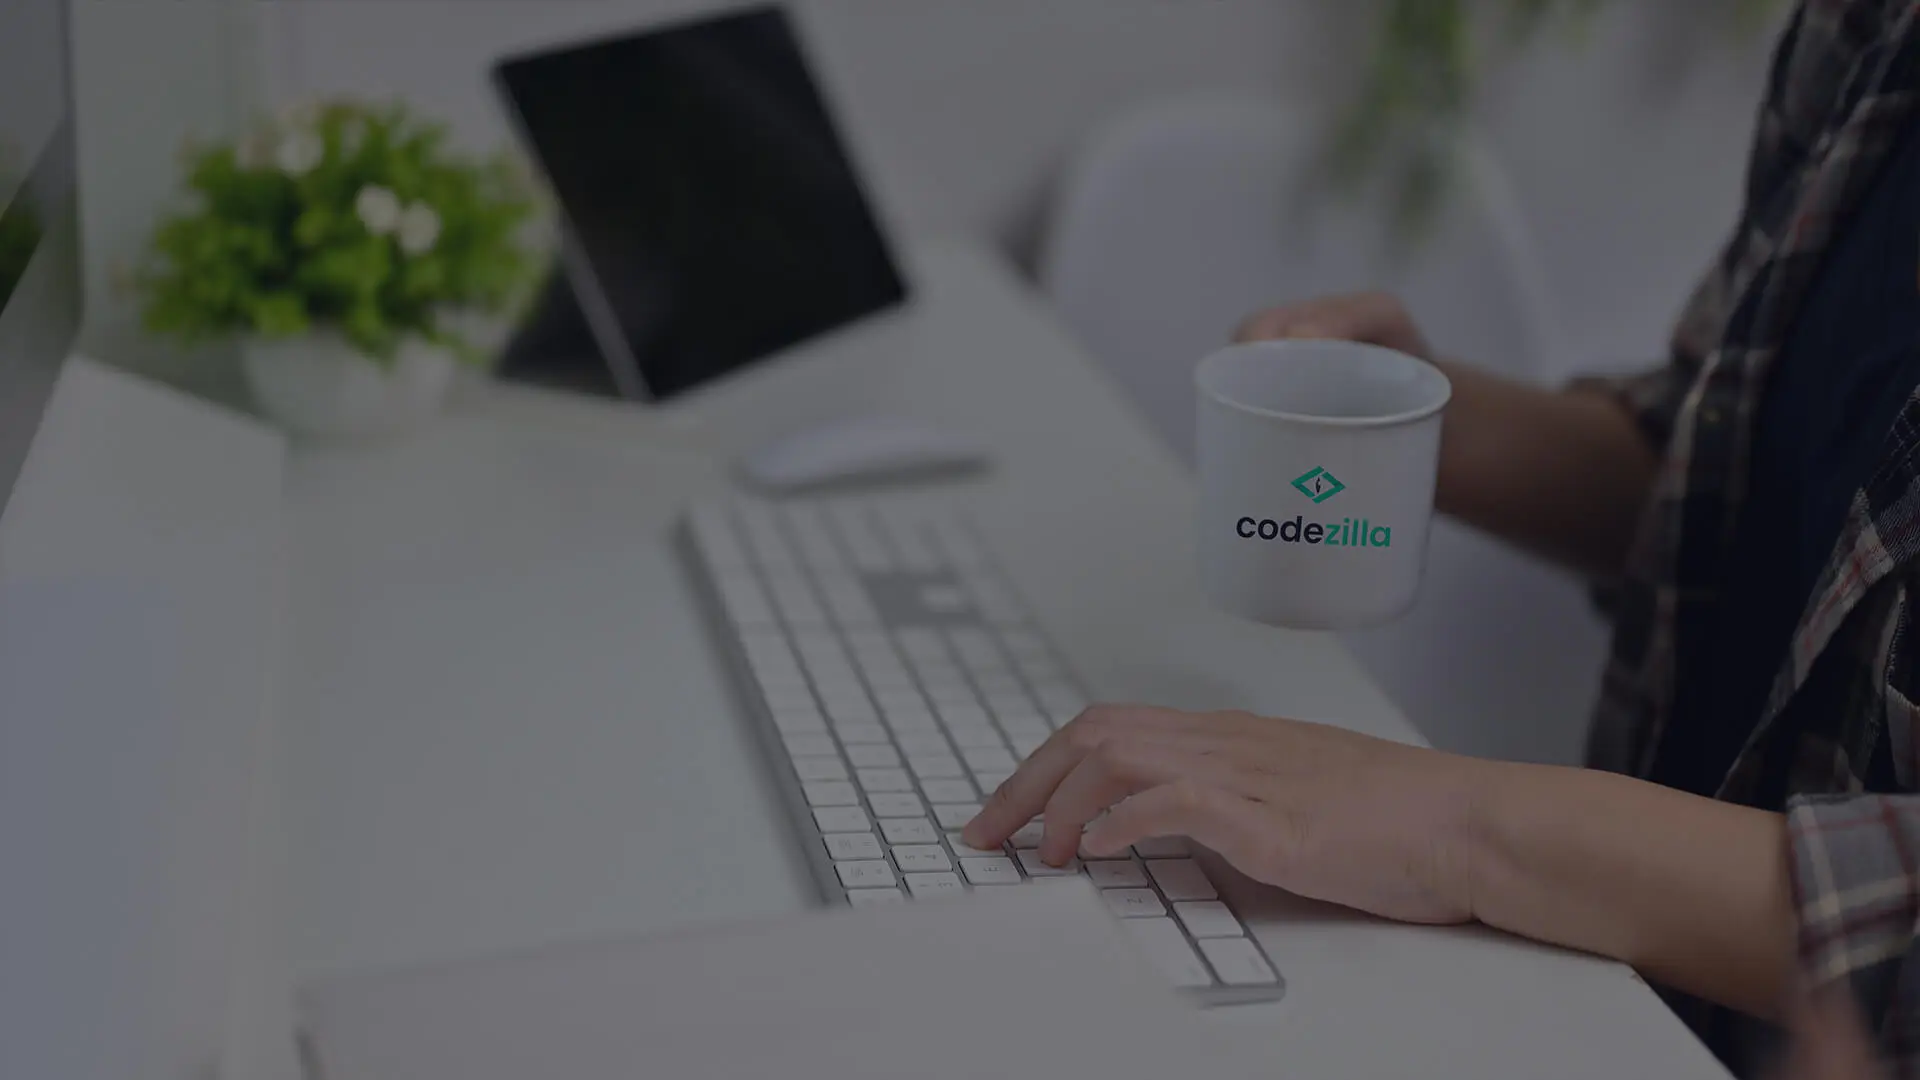 Codezilla employee working and drinking from a branded mug.